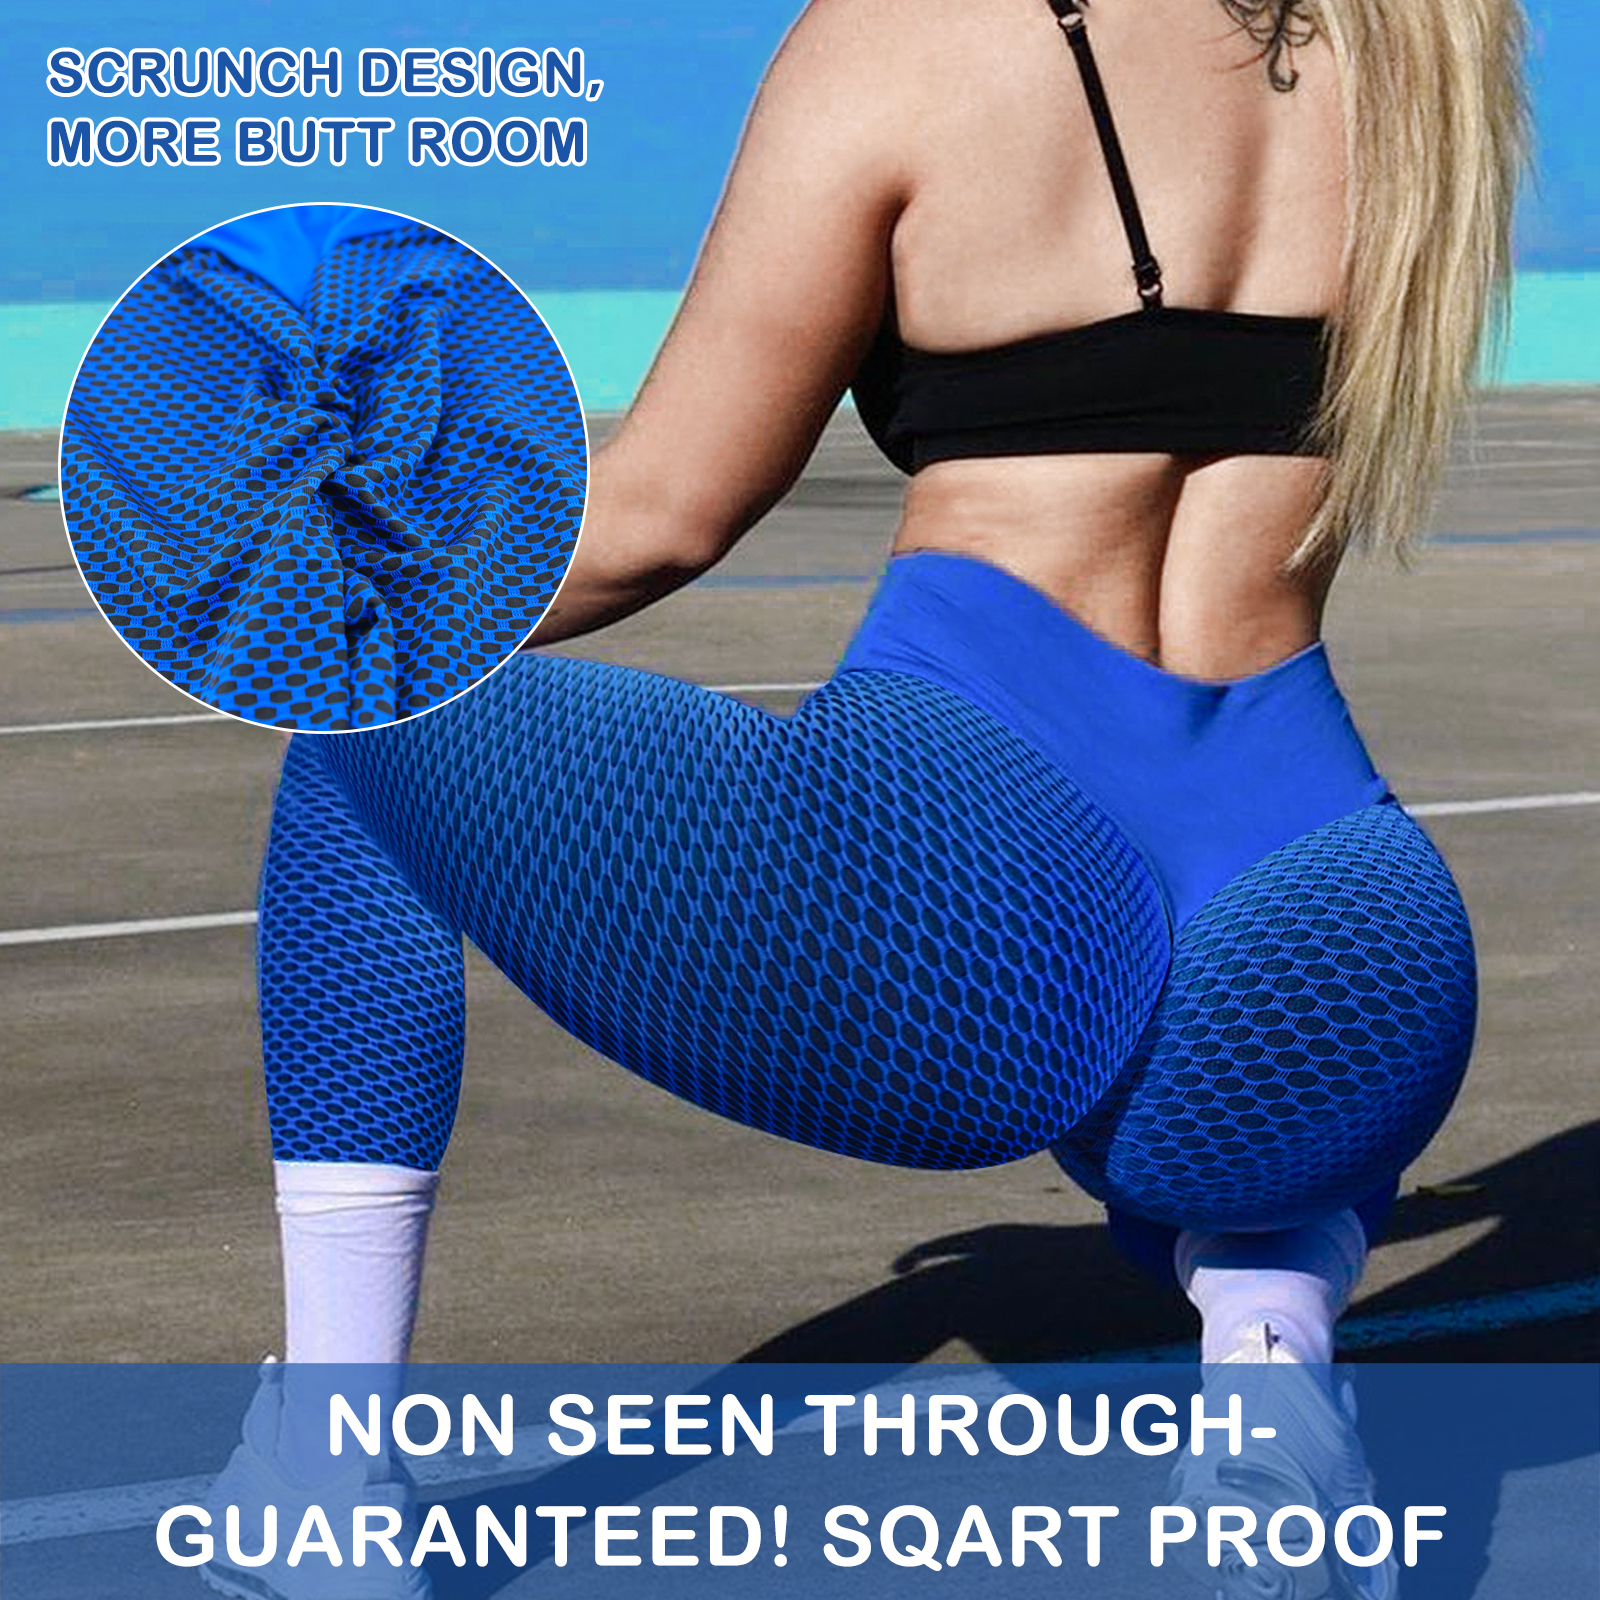 I went to a new gym in booty scrunch leggings & just a sports bra